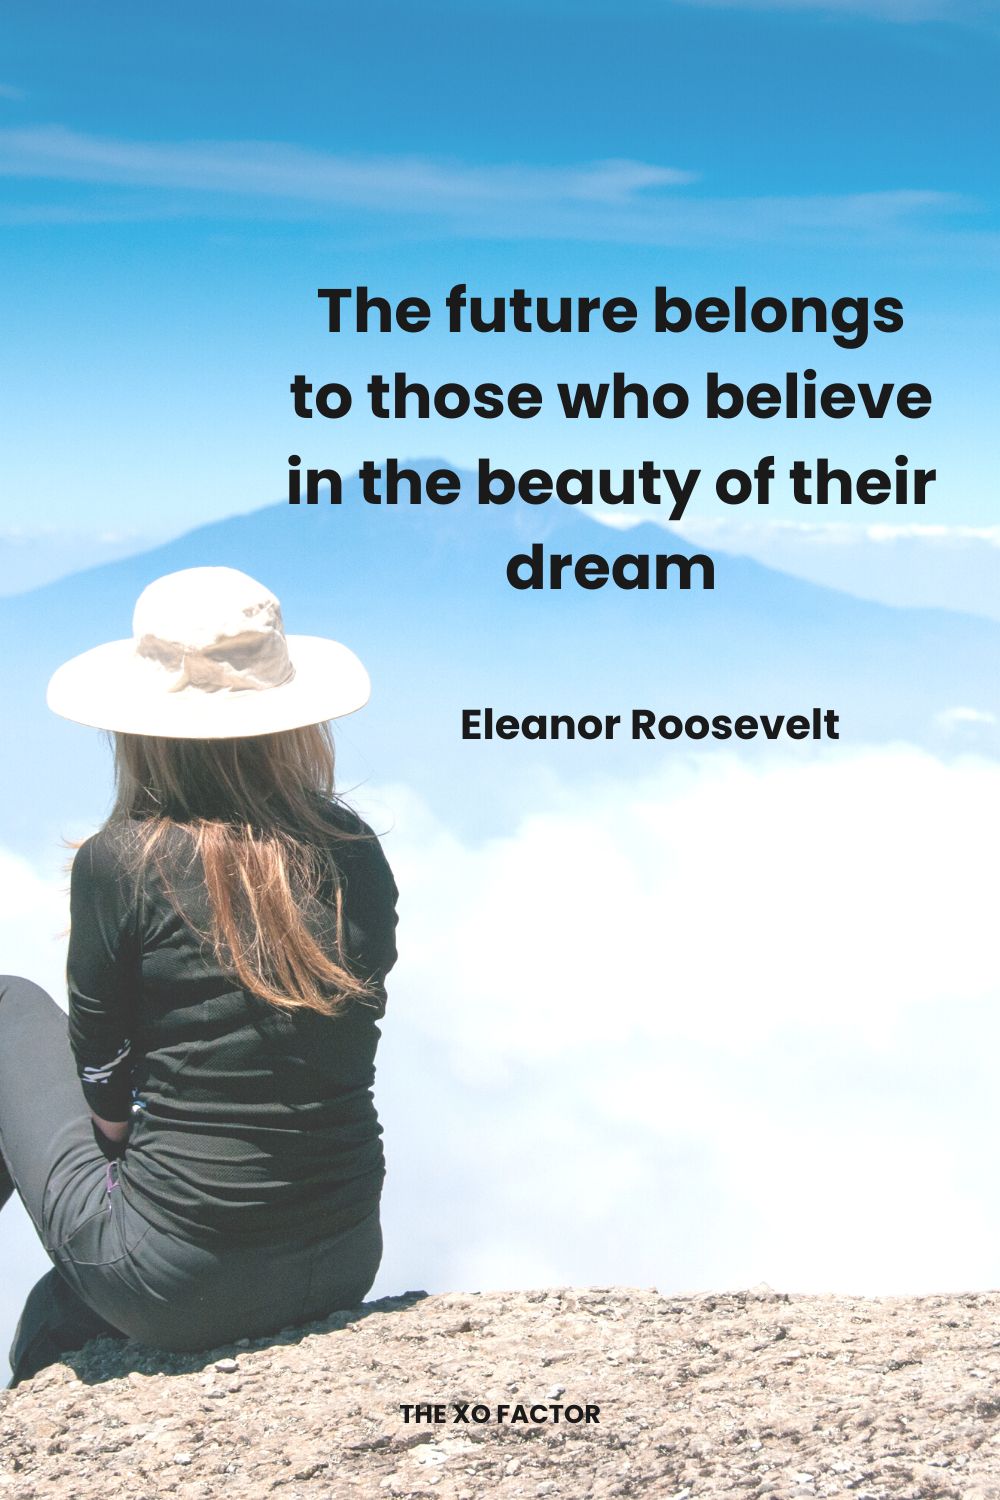 The future belongs to those who believe in the beauty of their dream Eleanor Roosevelt